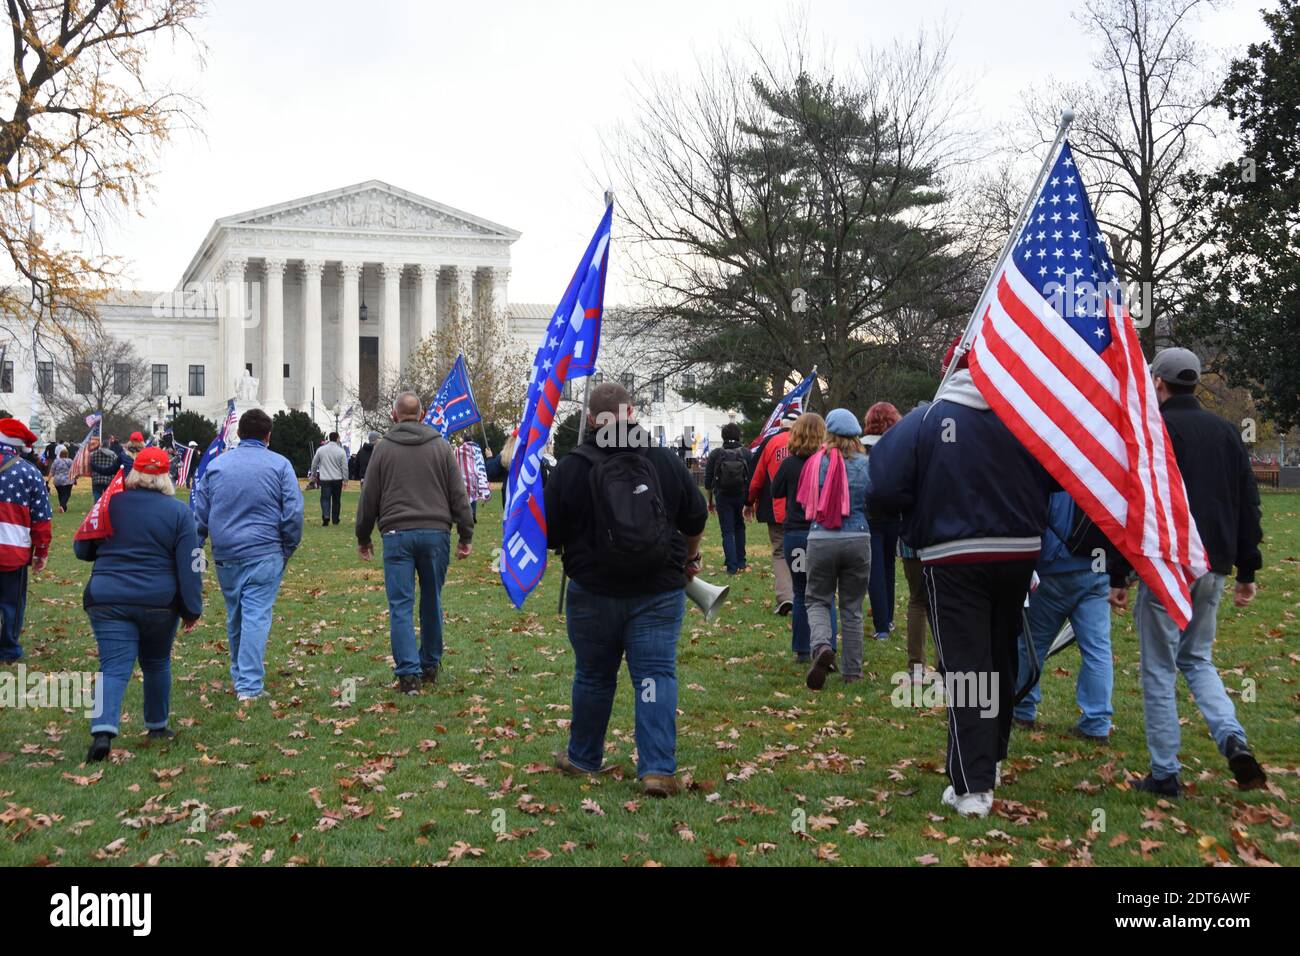 Washington DC. March for Trump to demand election transparency and integrity. Trump supporters started gathering at US Supreme Court in the morning. Stock Photo